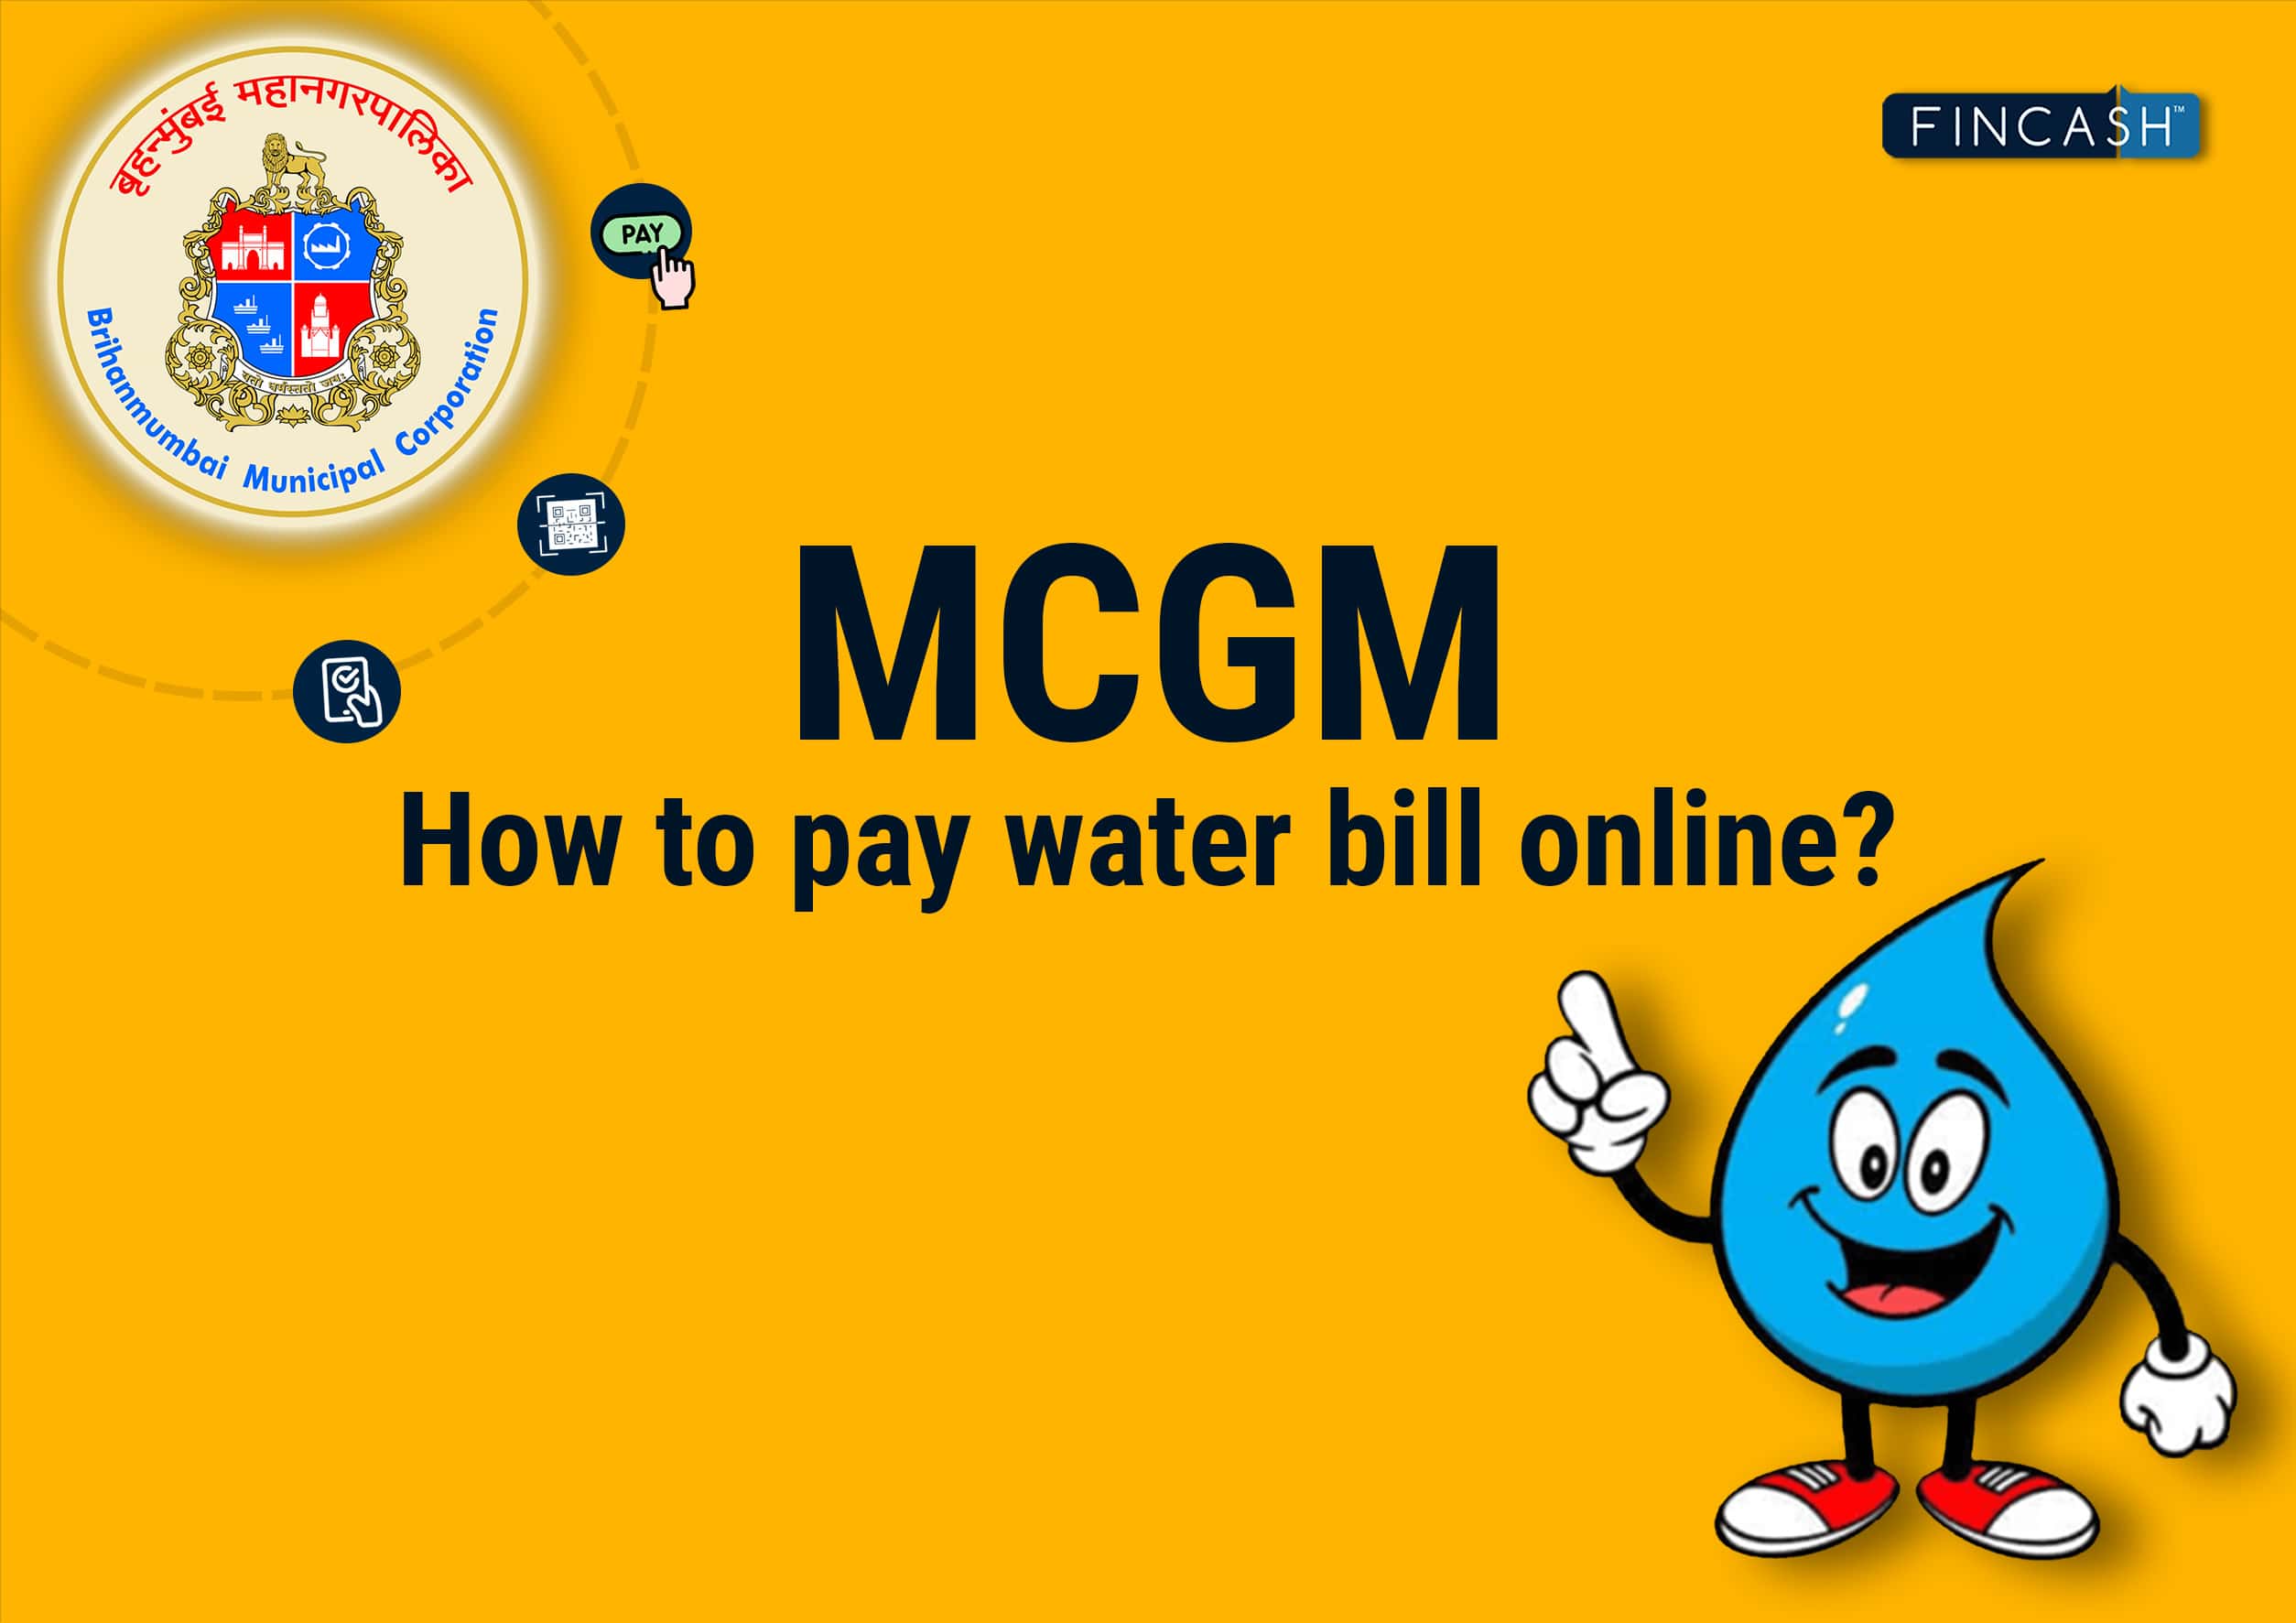 How to Pay MCGM Water Bills?